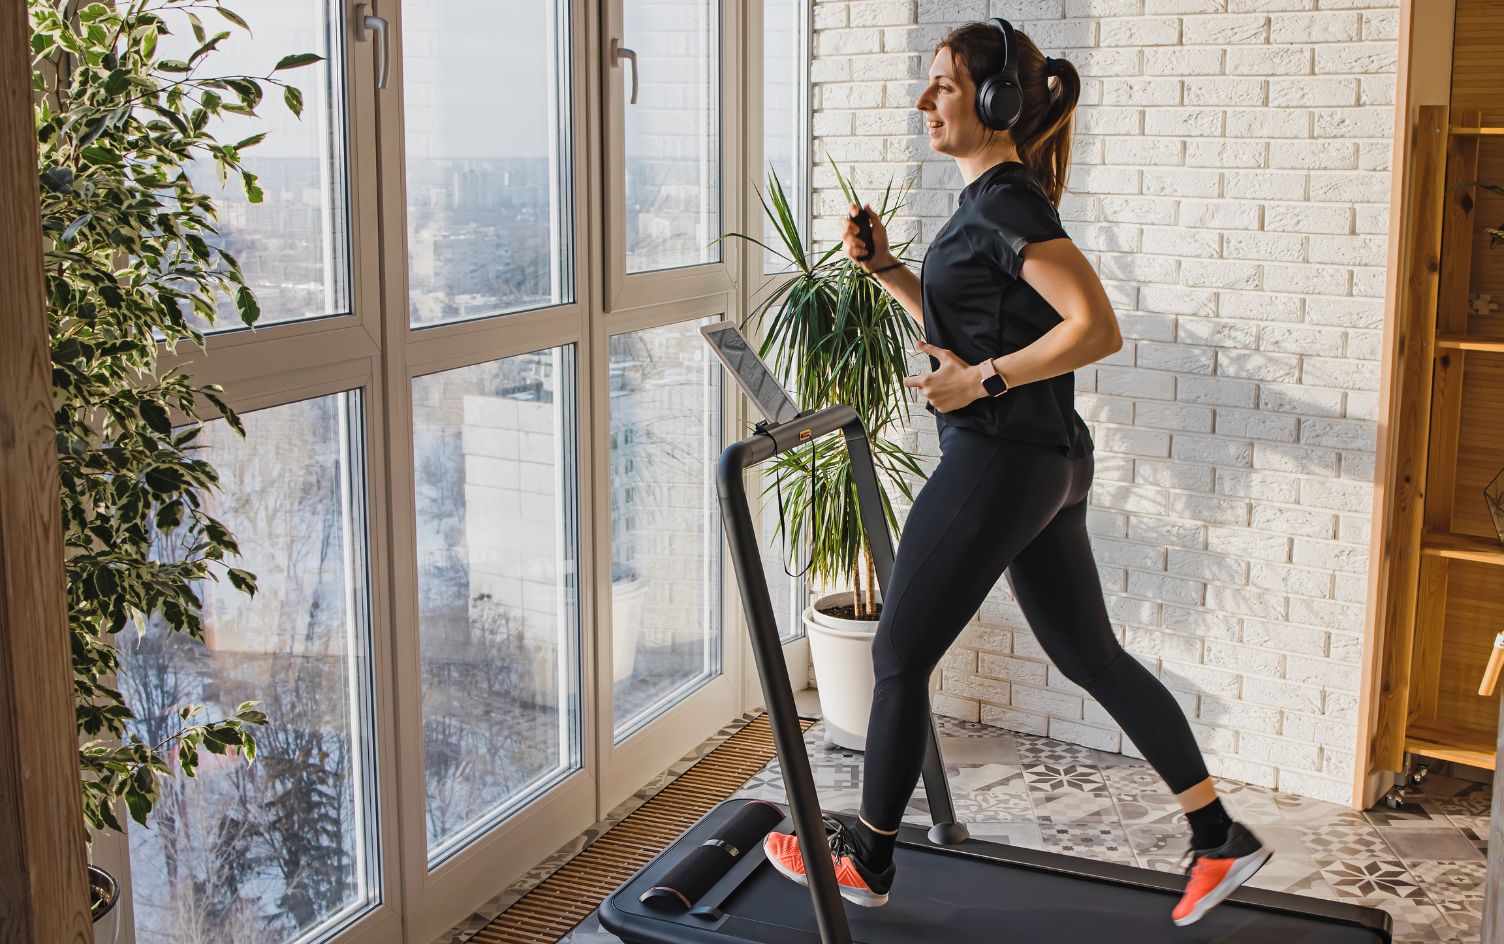 12 Amazing Exercise Benefits That Aren't About Weight Loss